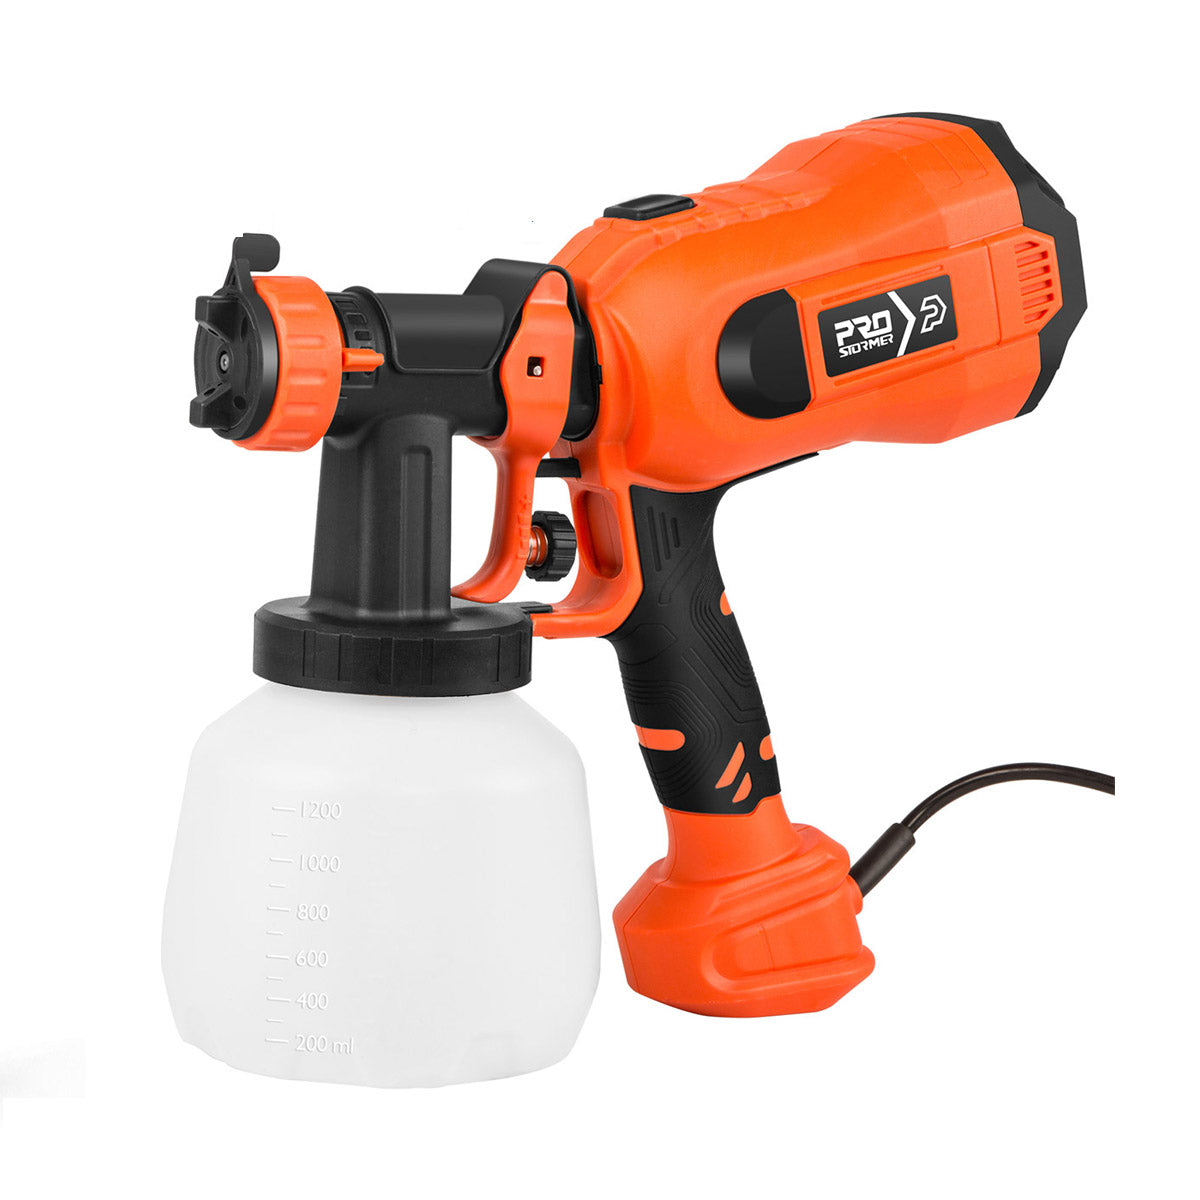 Dropship 750W Electric Paint Sprayer Handheld HVLP Spray Painter Painting  Spray Gun For Fences Brick Walls to Sell Online at a Lower Price